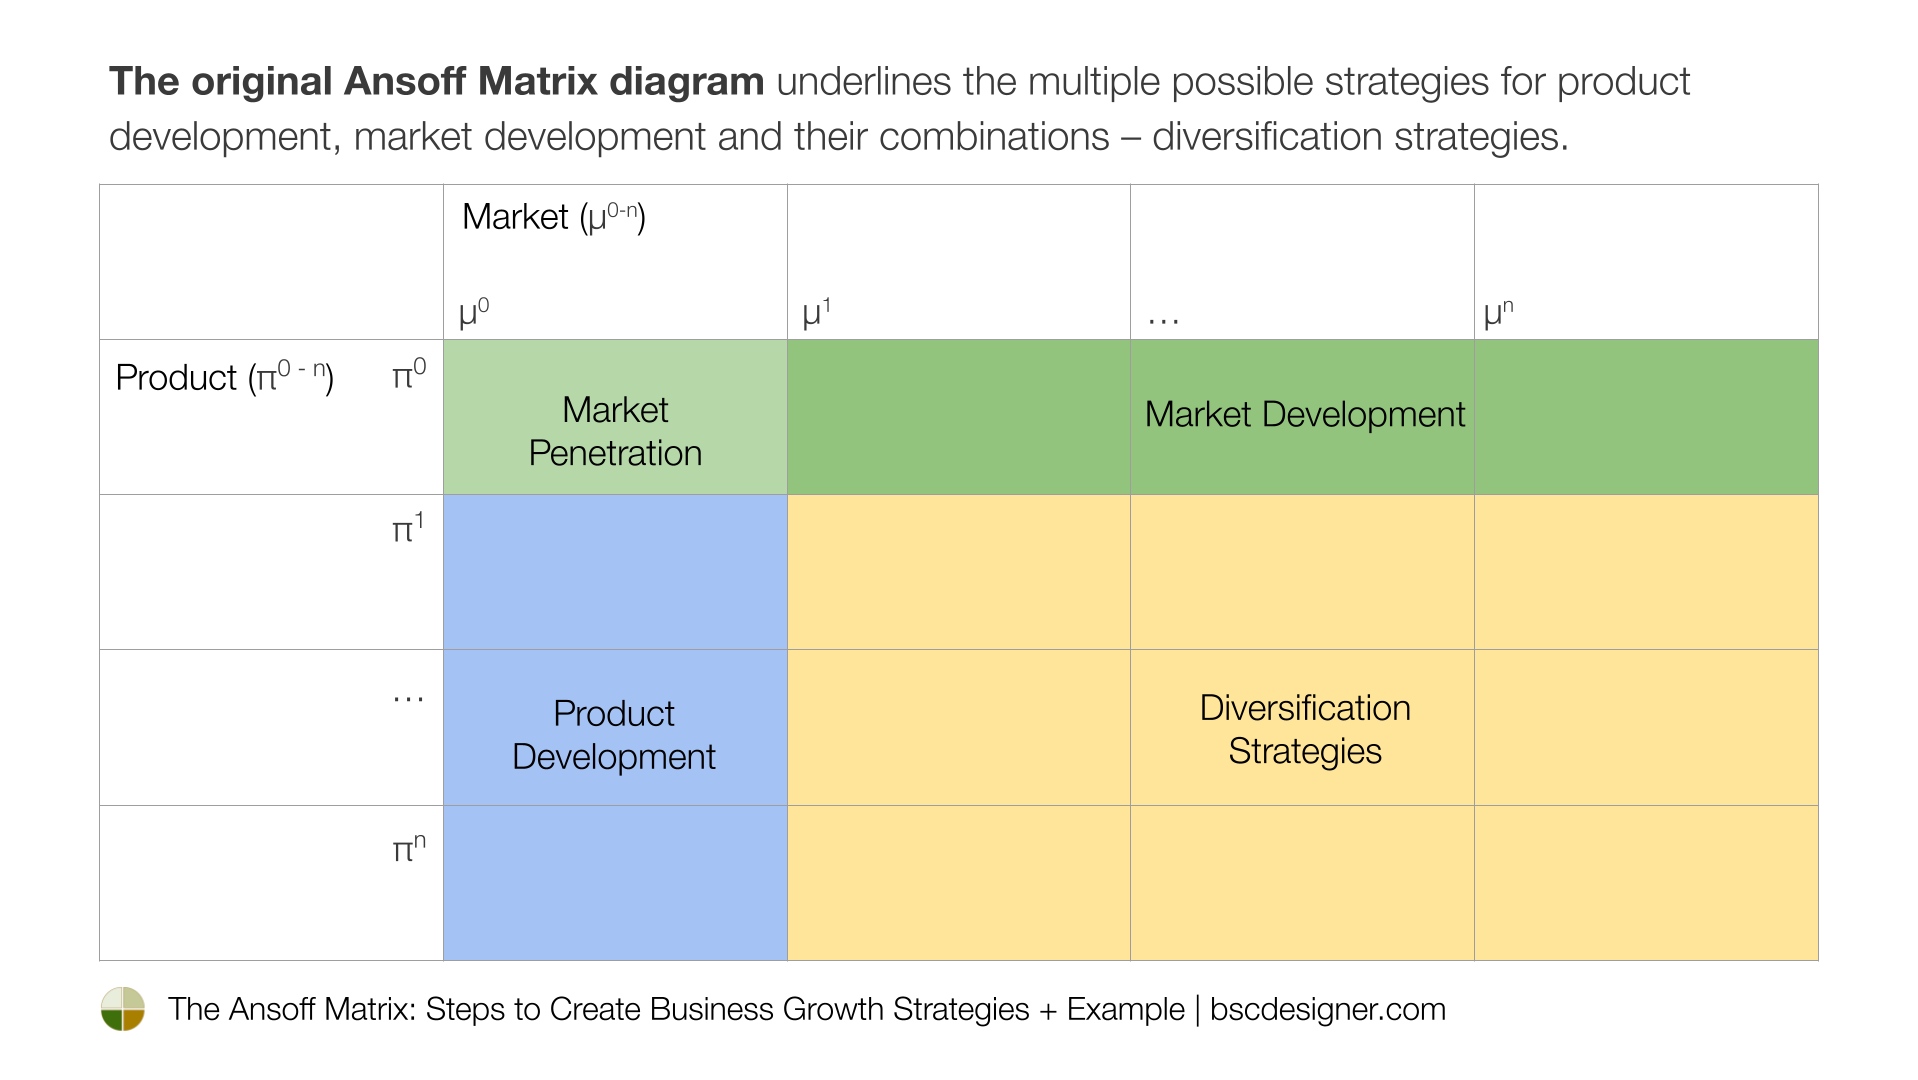 The original Ansoff Matrix diagram underlines the multiple possible strategies for product development, market development and their combinations – diversification strategies.